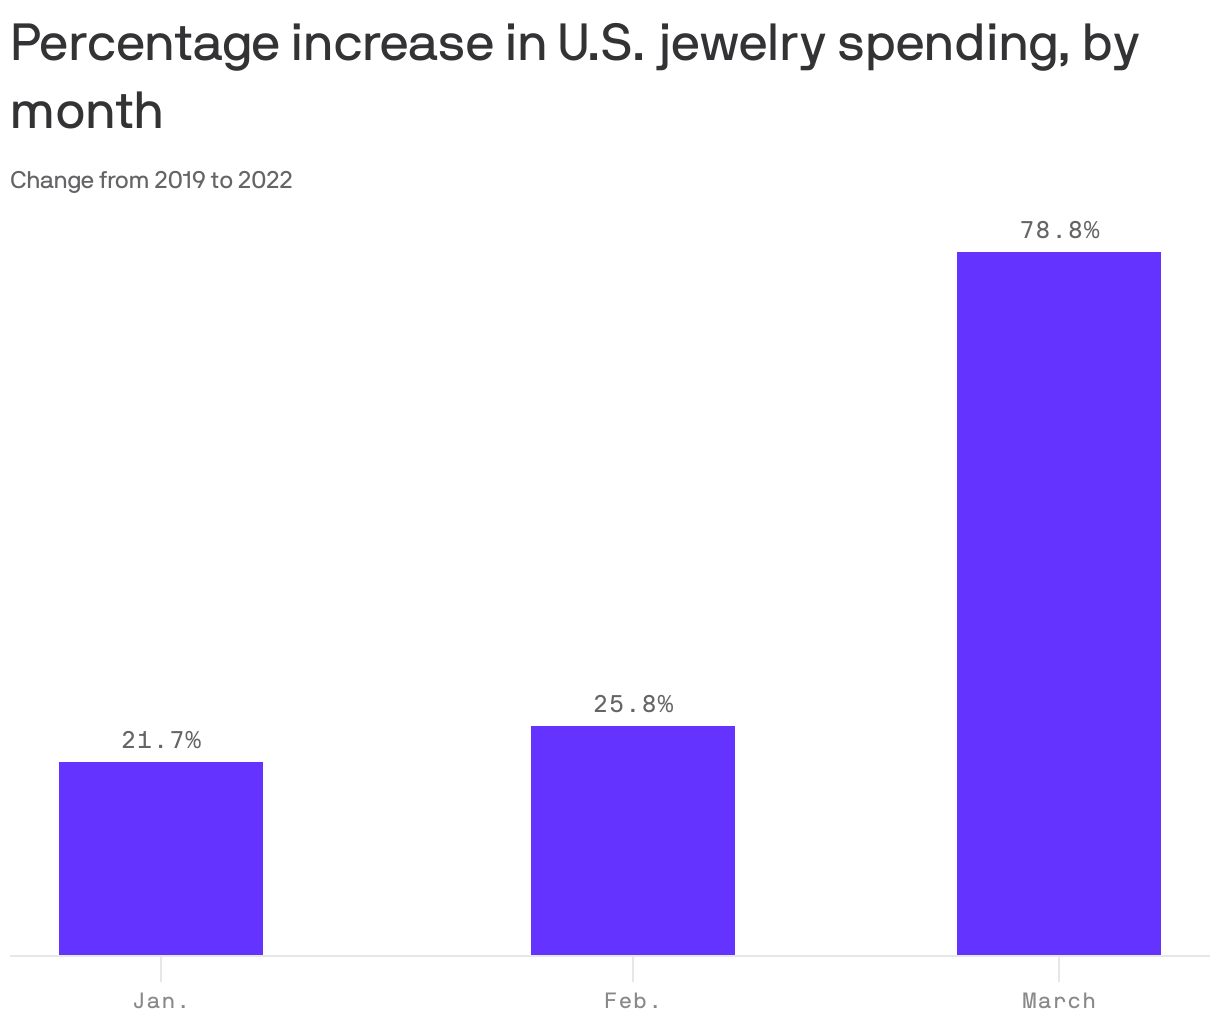 Percentage increase in U.S. jewelry spending, by month